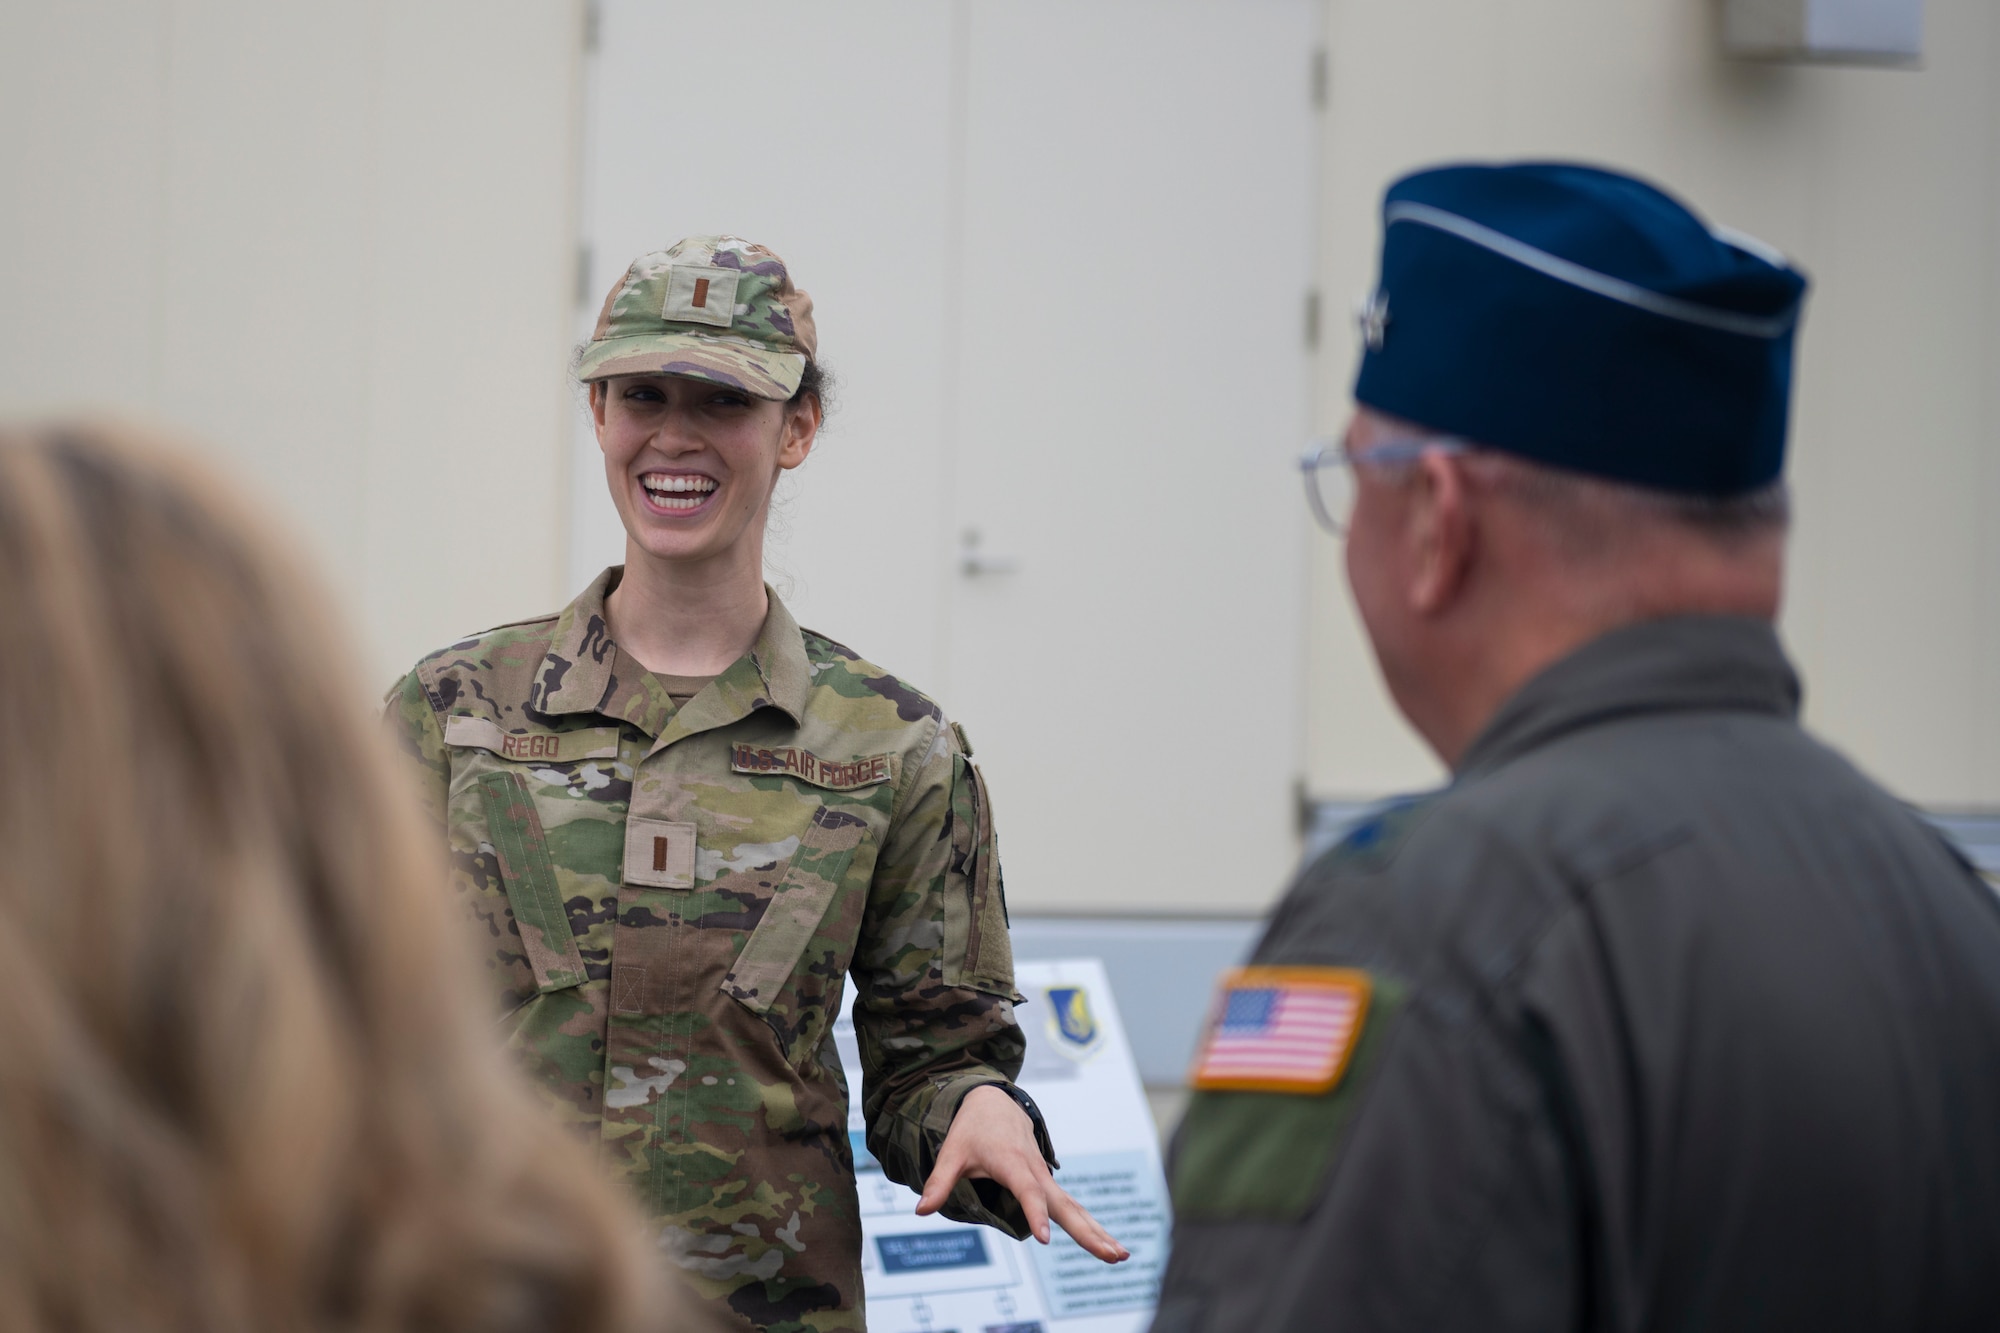 Military member laughing during a briefing.